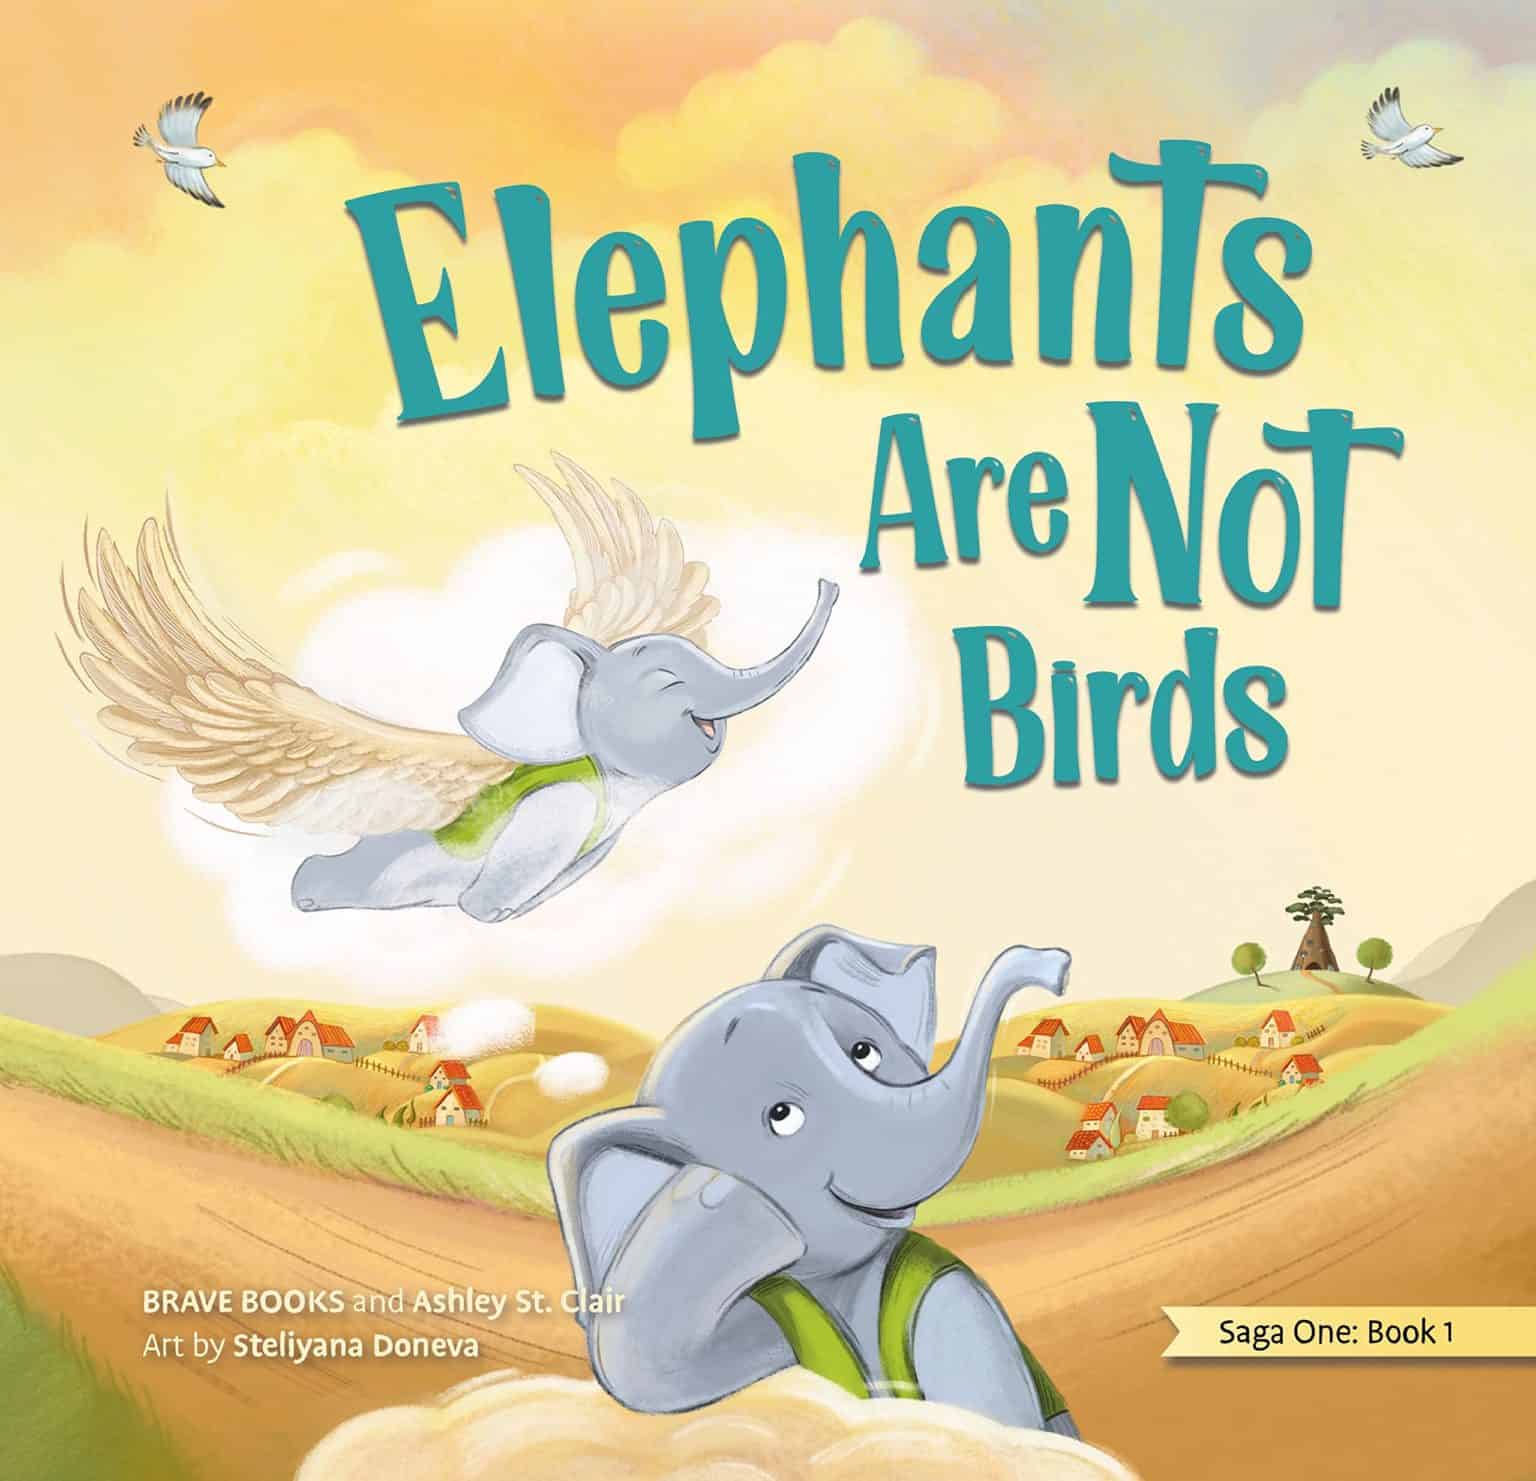 Cover image of the book "Elephants Are Not Birds"